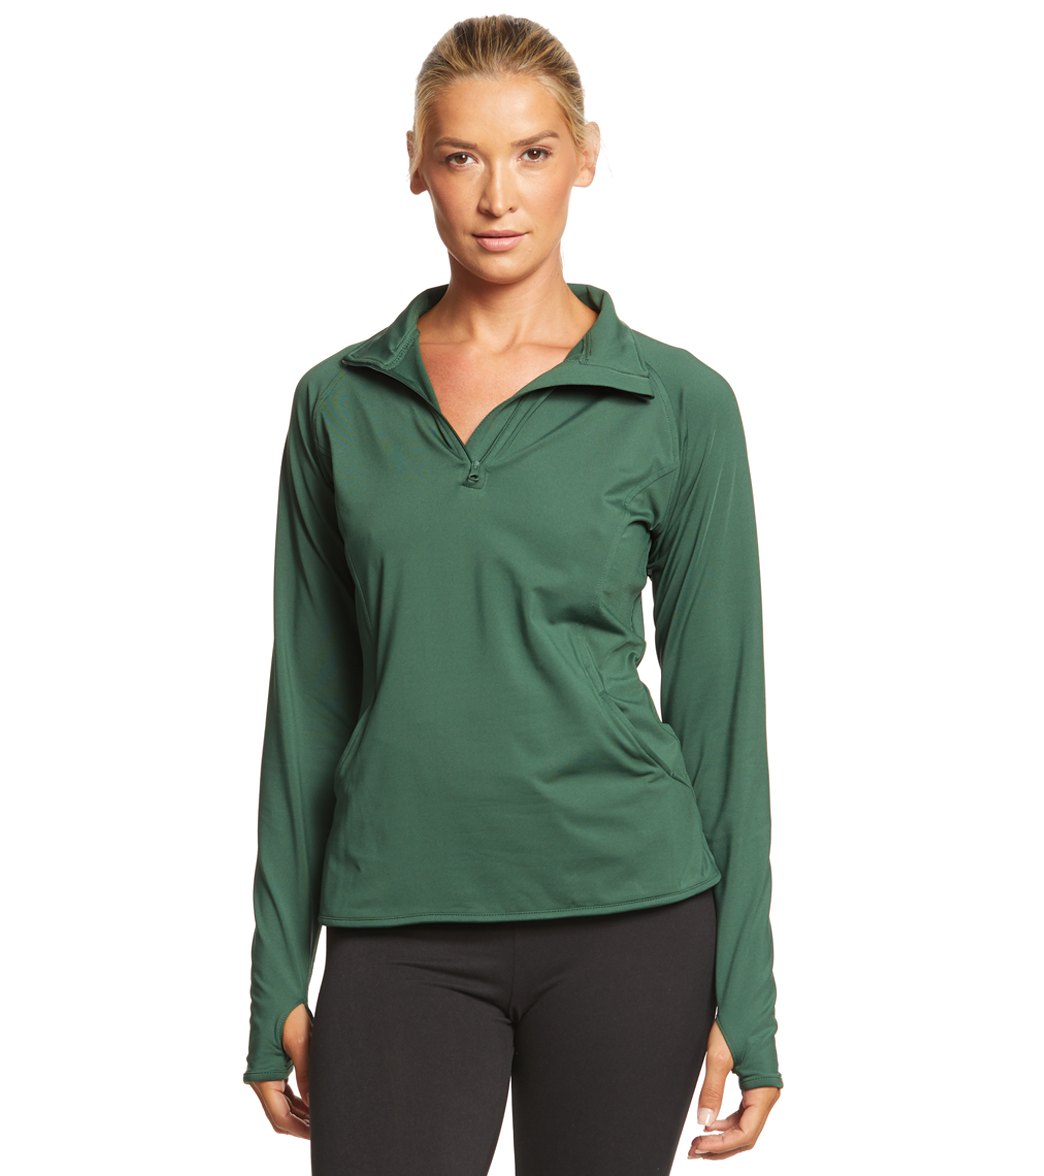 Women's Sport-Tek Sport-Wick Stretch 1/2-Zip Pullover - Forest Green Large Polyester/Spandex - Swimoutlet.com